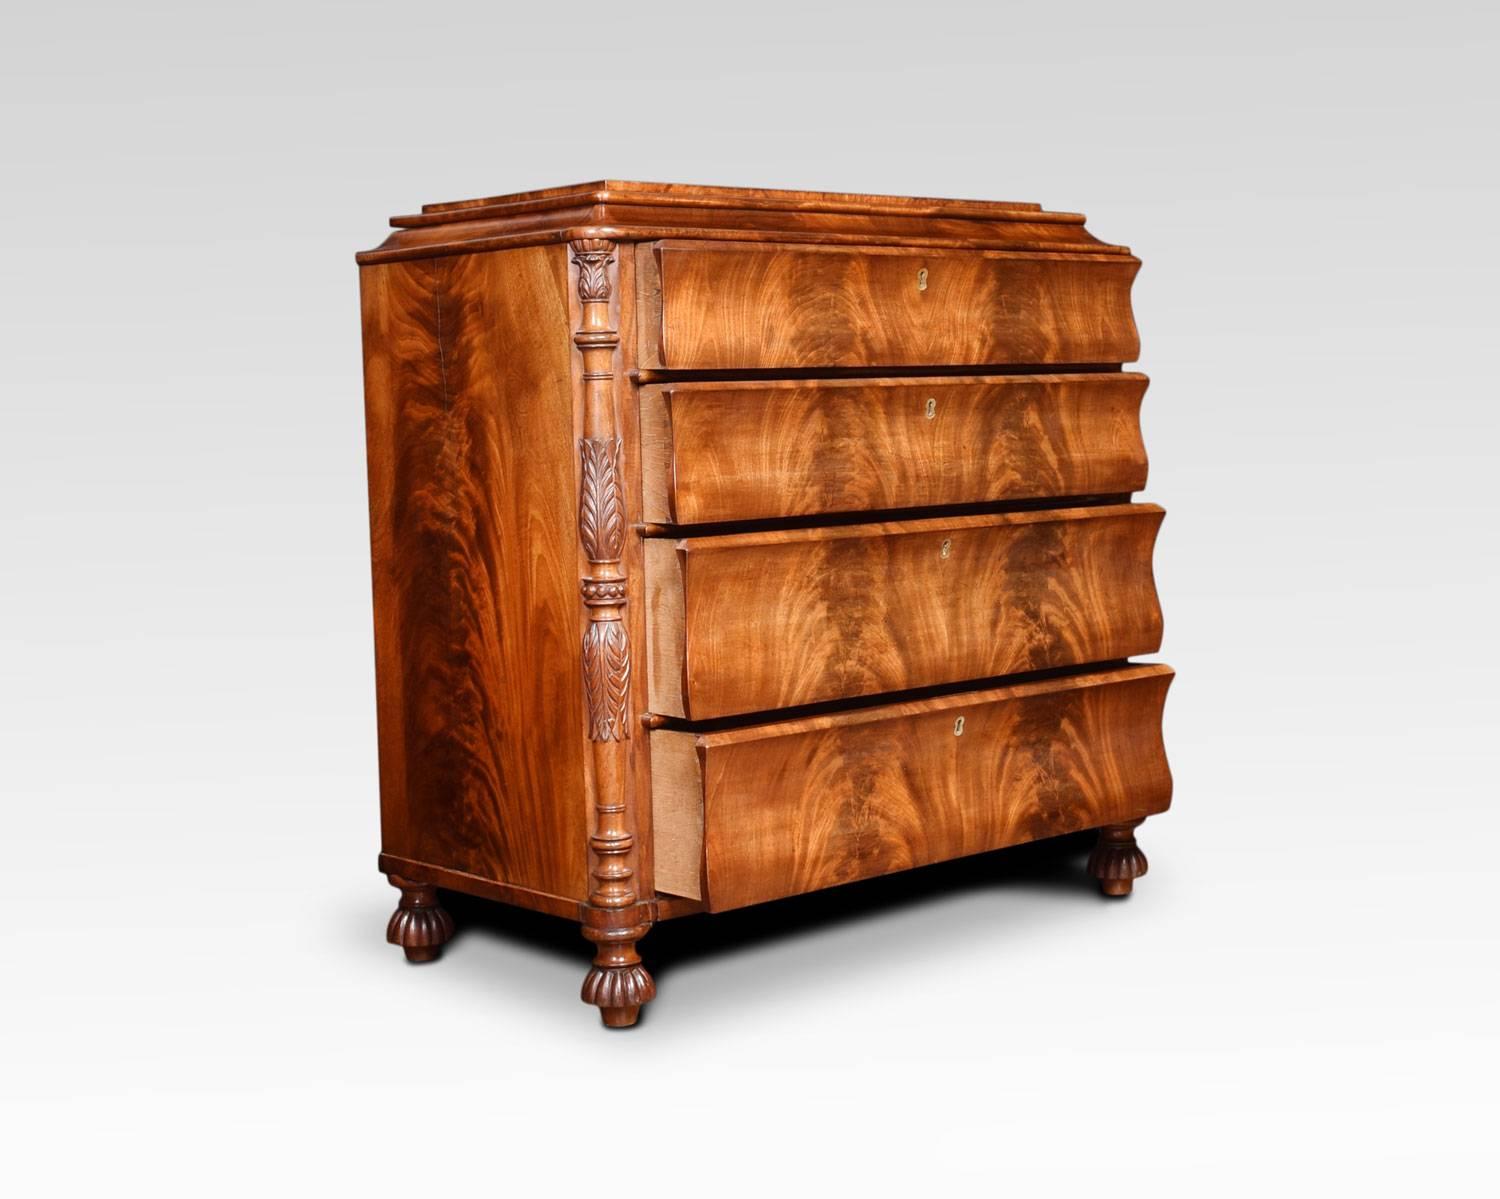 19th century Biedermeier mahogany chest, with stepped top over four long graduated drawers flanked by chamfered acanthus capped columns. All raised up on gadrooned carved feet.
Dimensions:
Height 41.5 inches
Width 43 inches
Depth 22 inches.